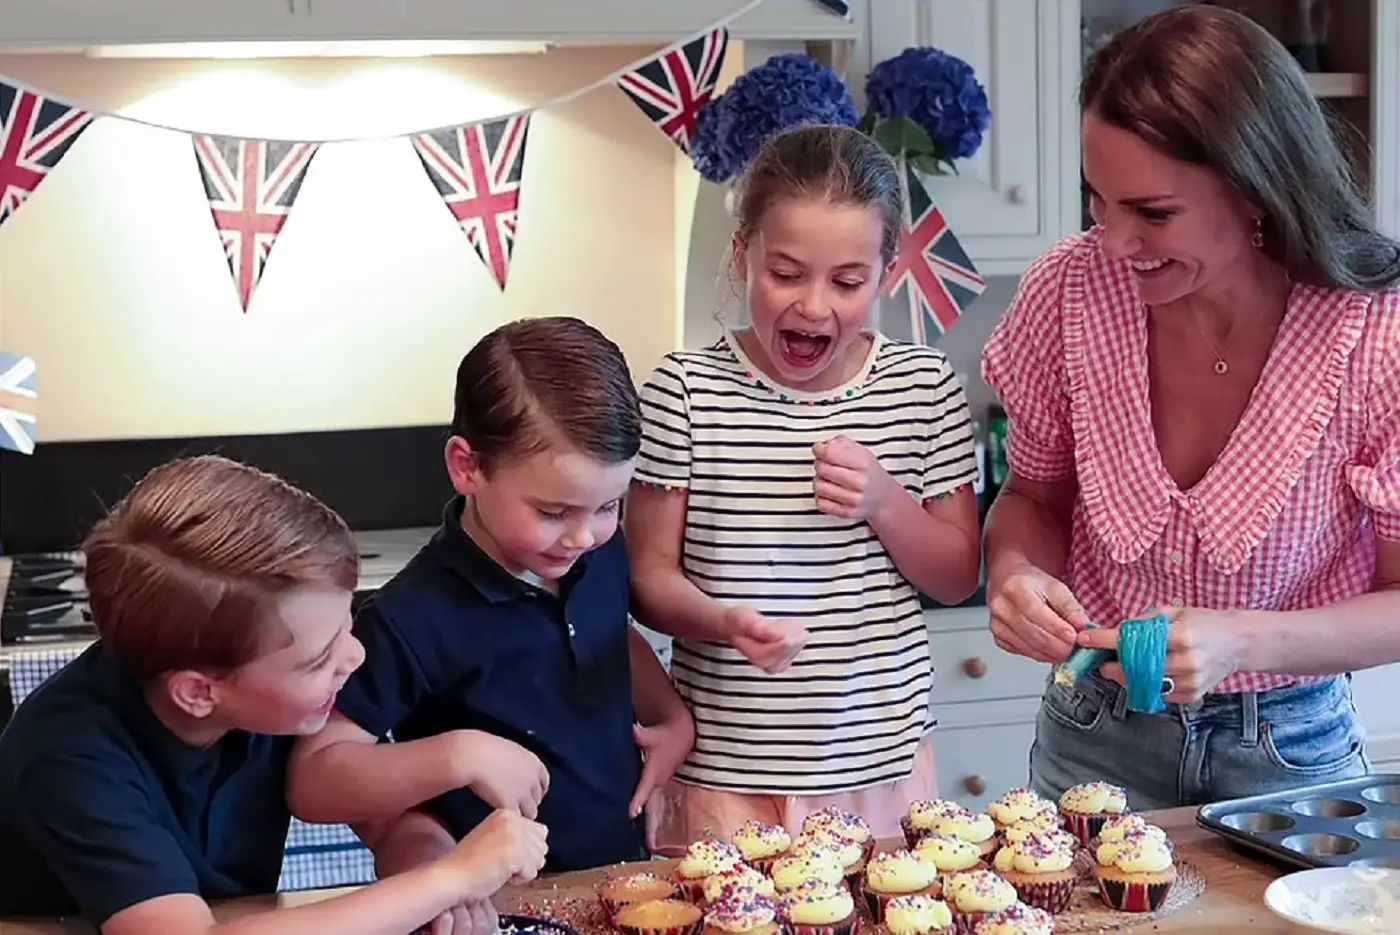 Ahead of their first Cardiff visit yesterday, Prince George and Princess Charlotte along with little Prince Louis helped their mummy The Duchess of Cambridge in baking cakes for a Cardiff street party.